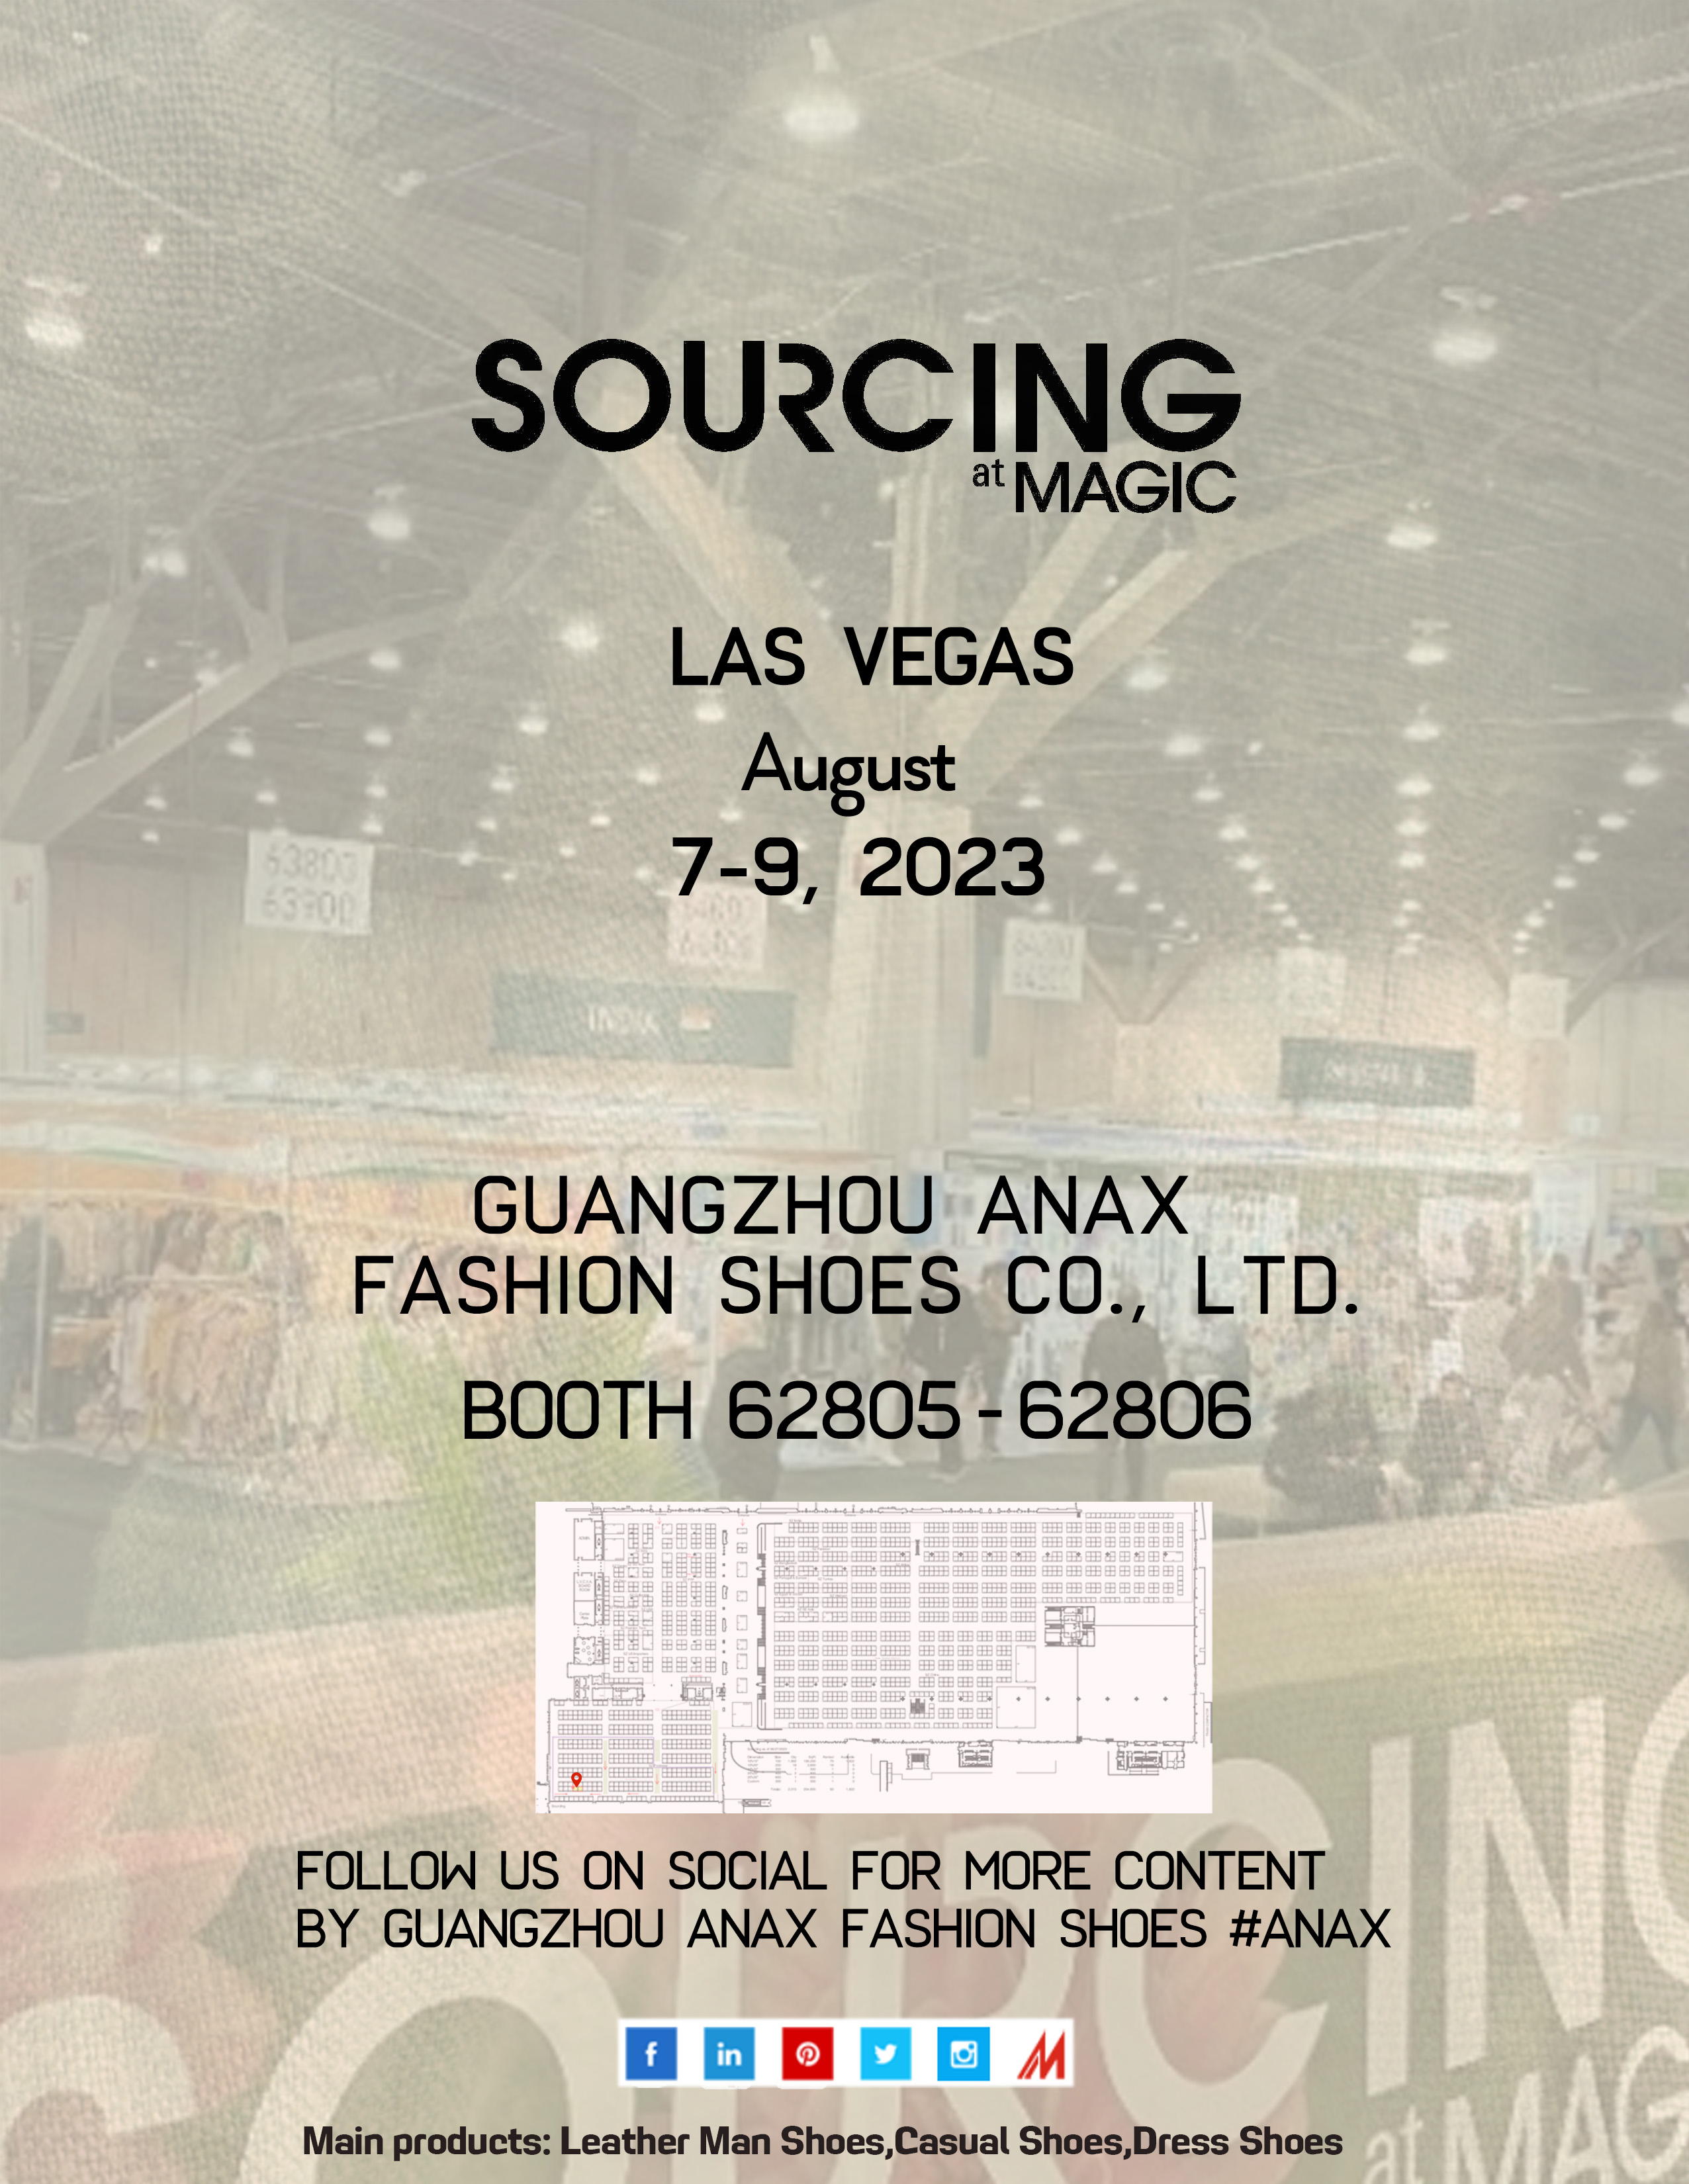 Sourcing at Magic Show in Las Vegas in Aug 7-9th, 2023